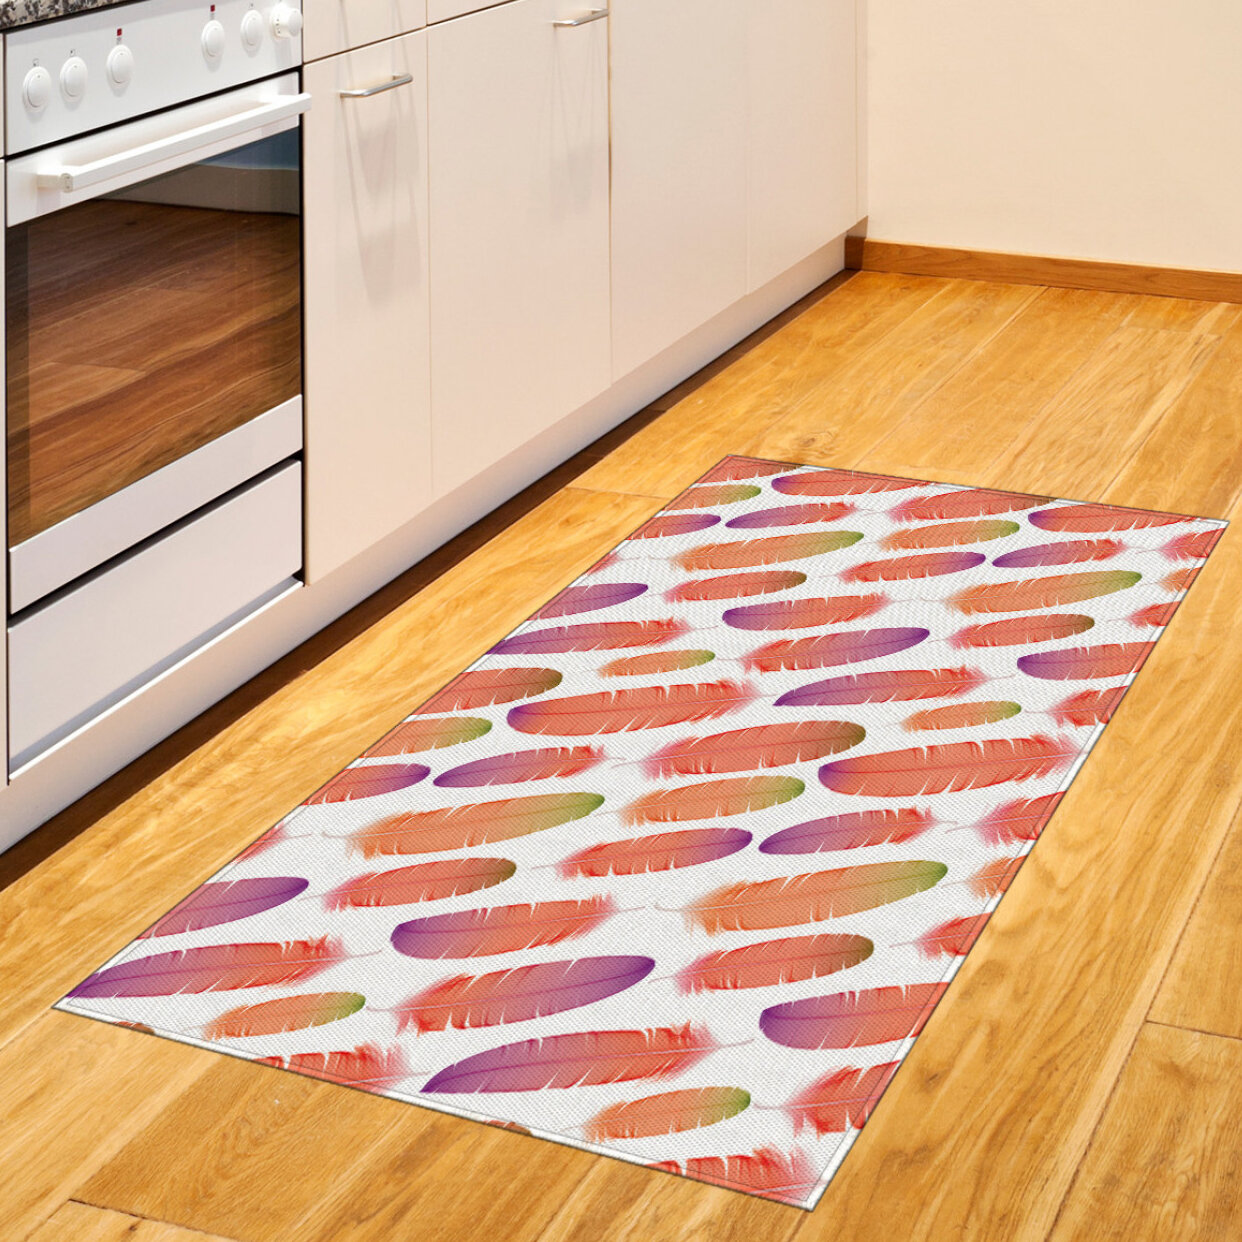 East Urban Home Ambesonne Feathers Area Rug